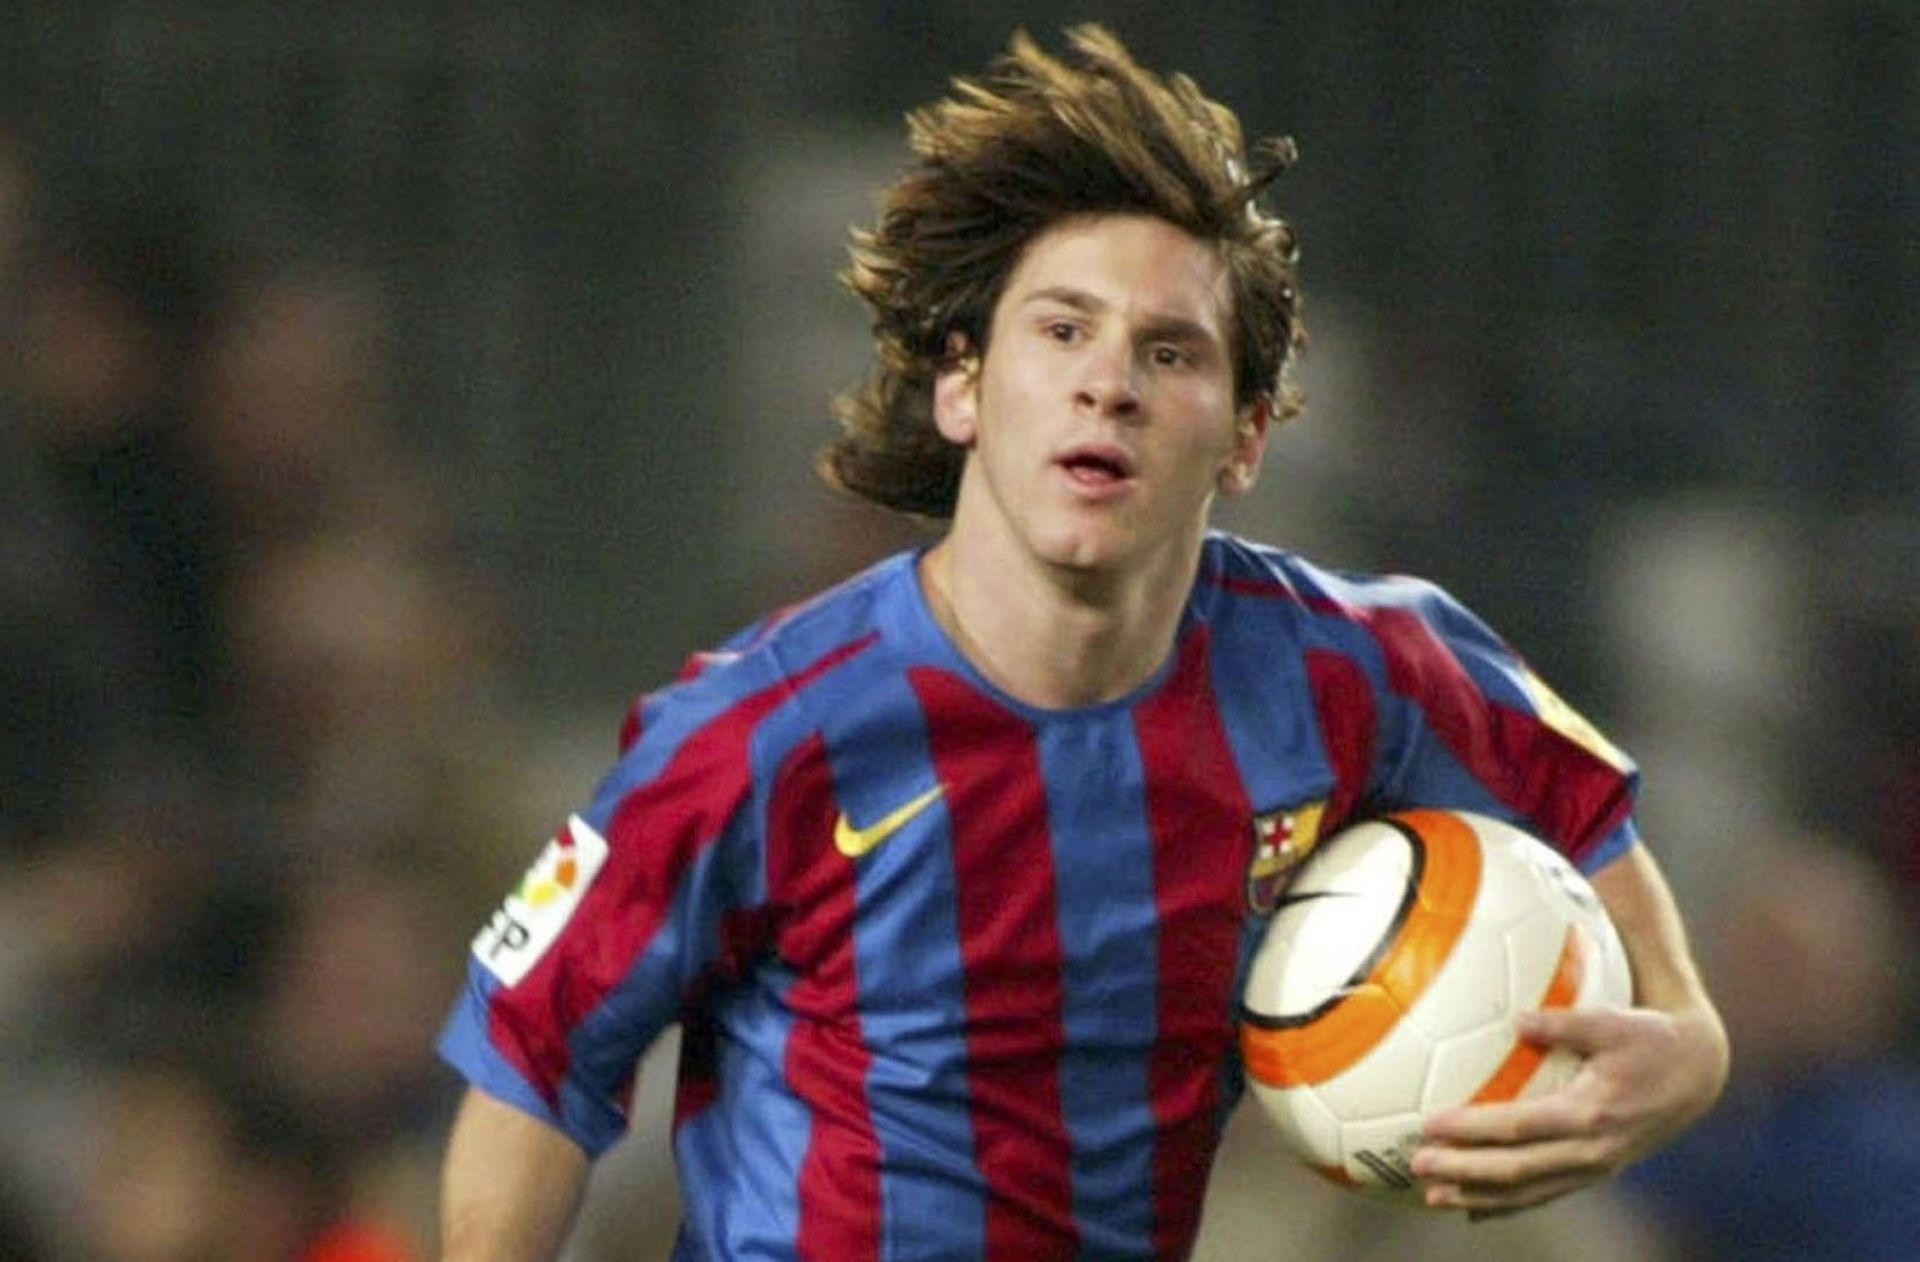 messi debut for barcelona age